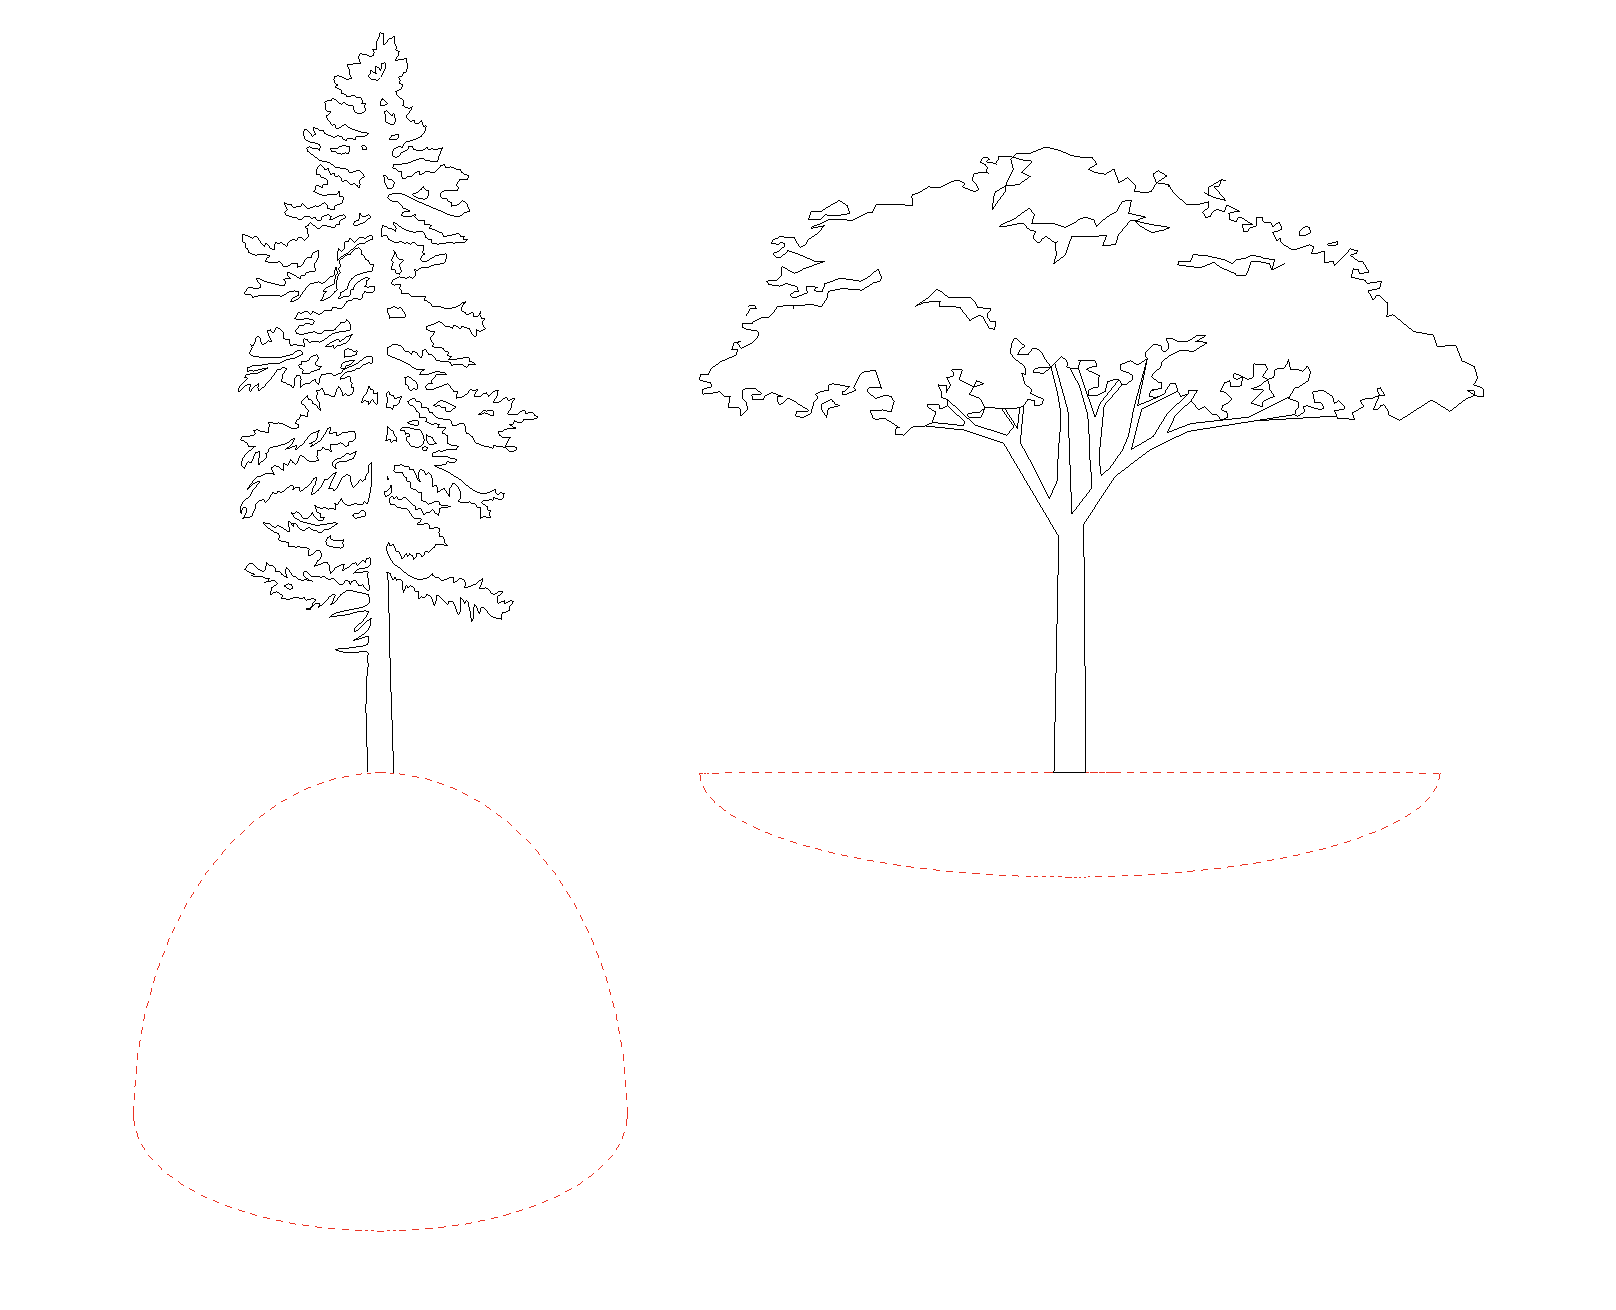 Revit elevation view of the critical root system shapes, lateral and oblique.